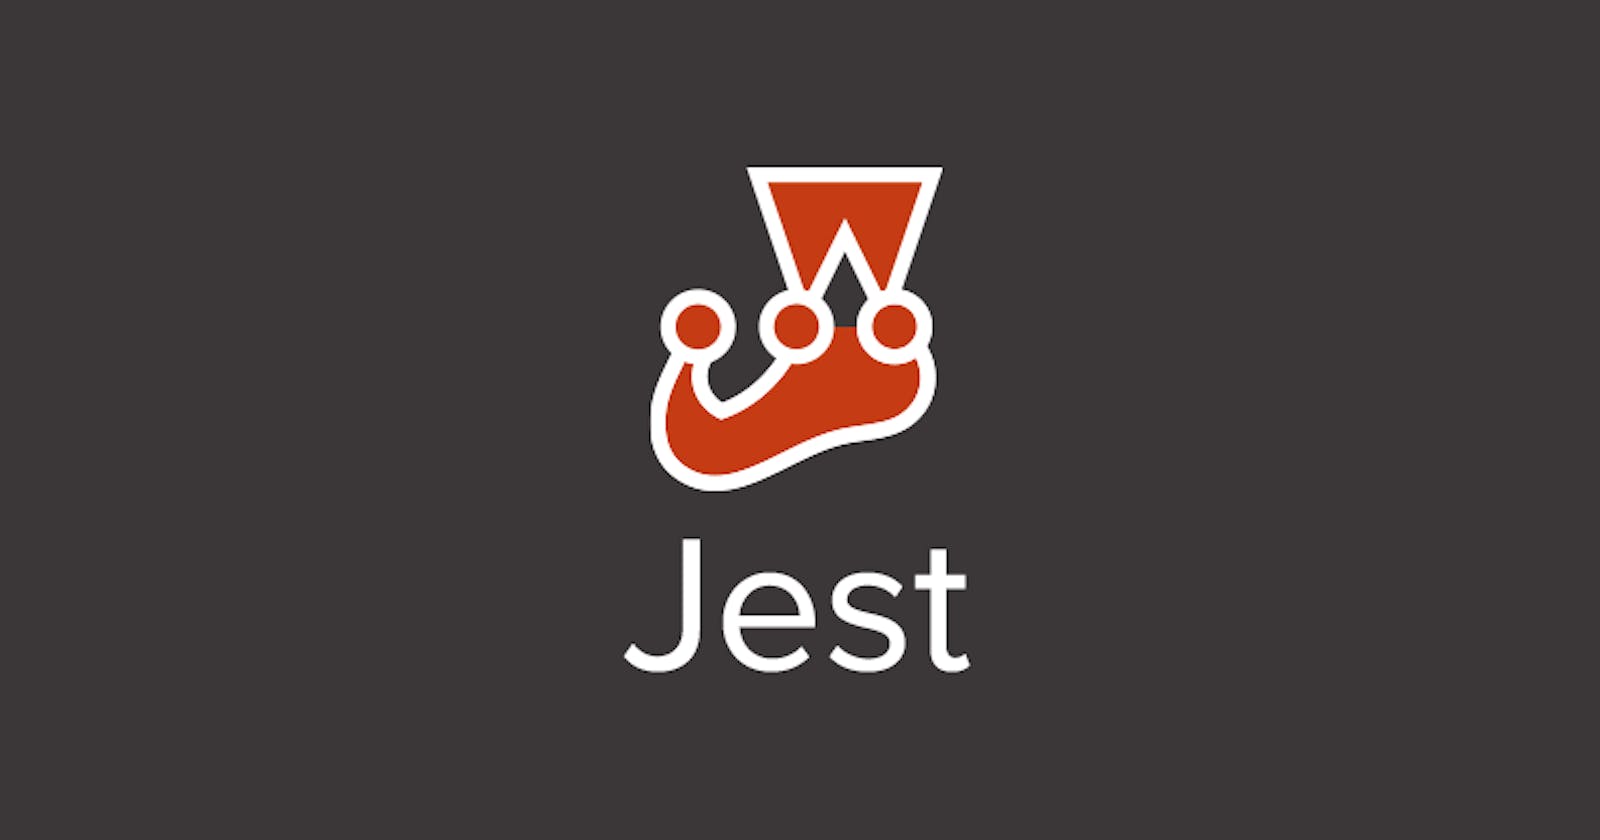 Getting started with Jest in just 5 minutes